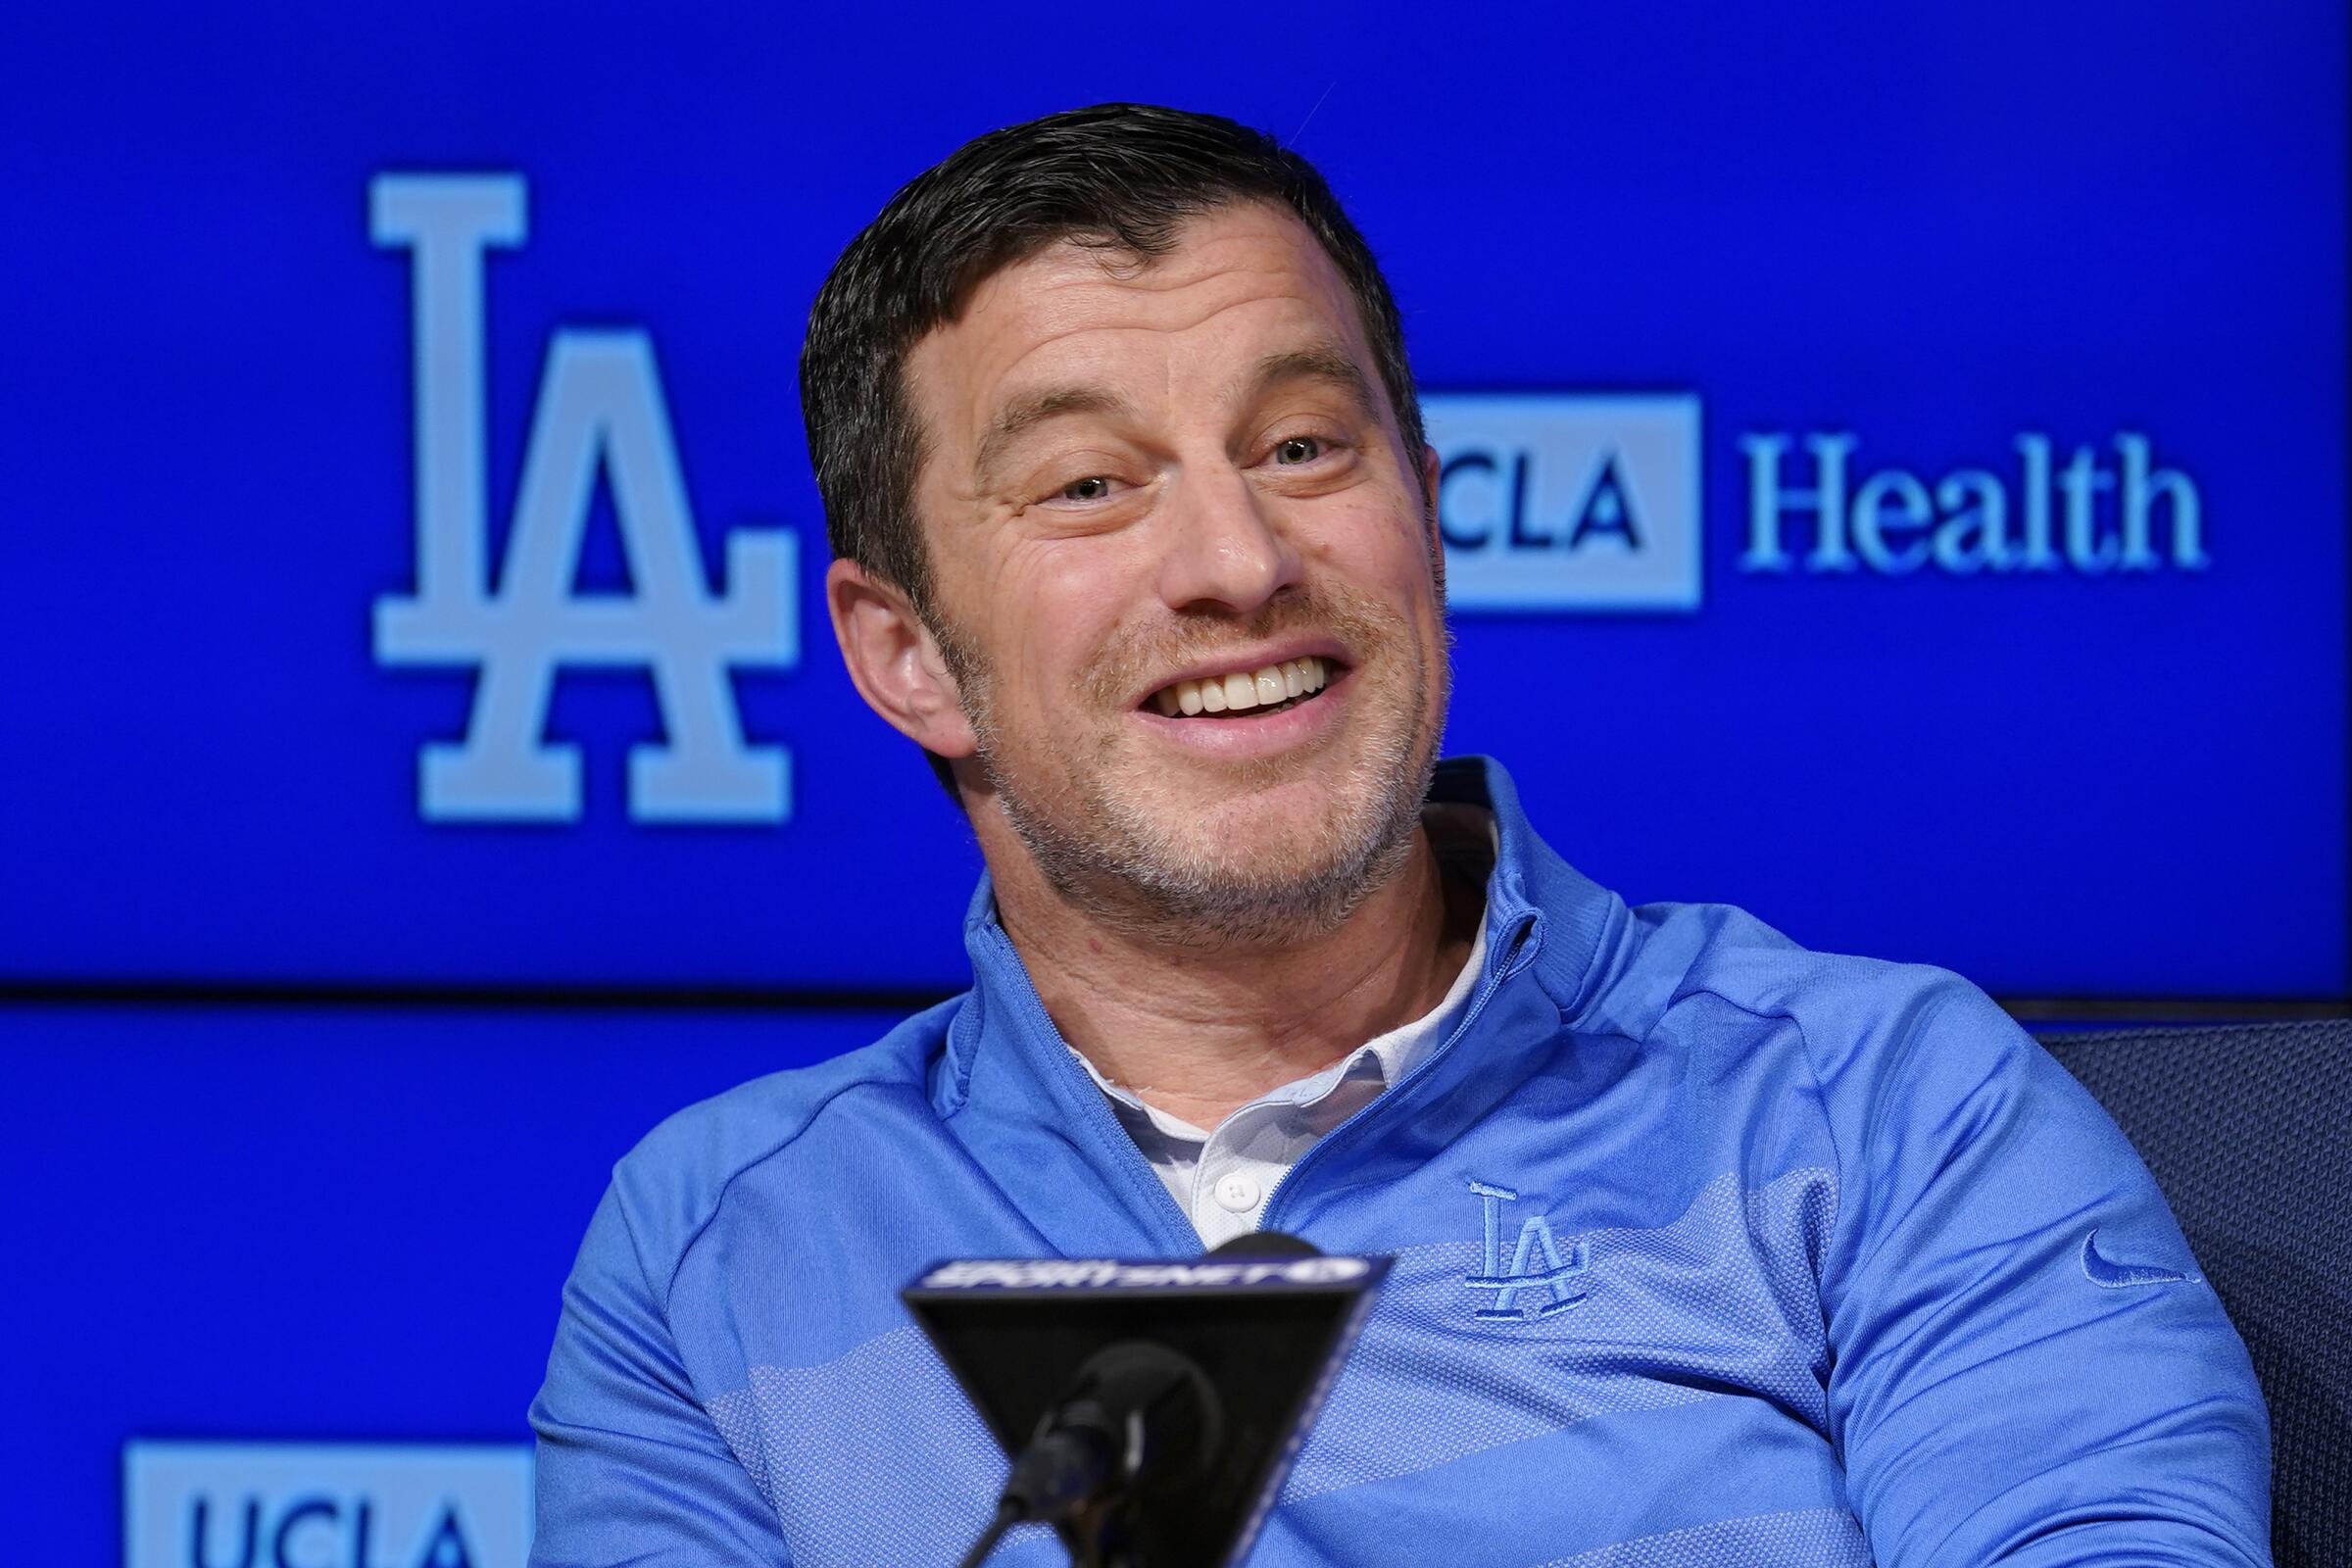 Andrew Friedman, the Dodgers' president of baseball operations, speaks during a news conference.